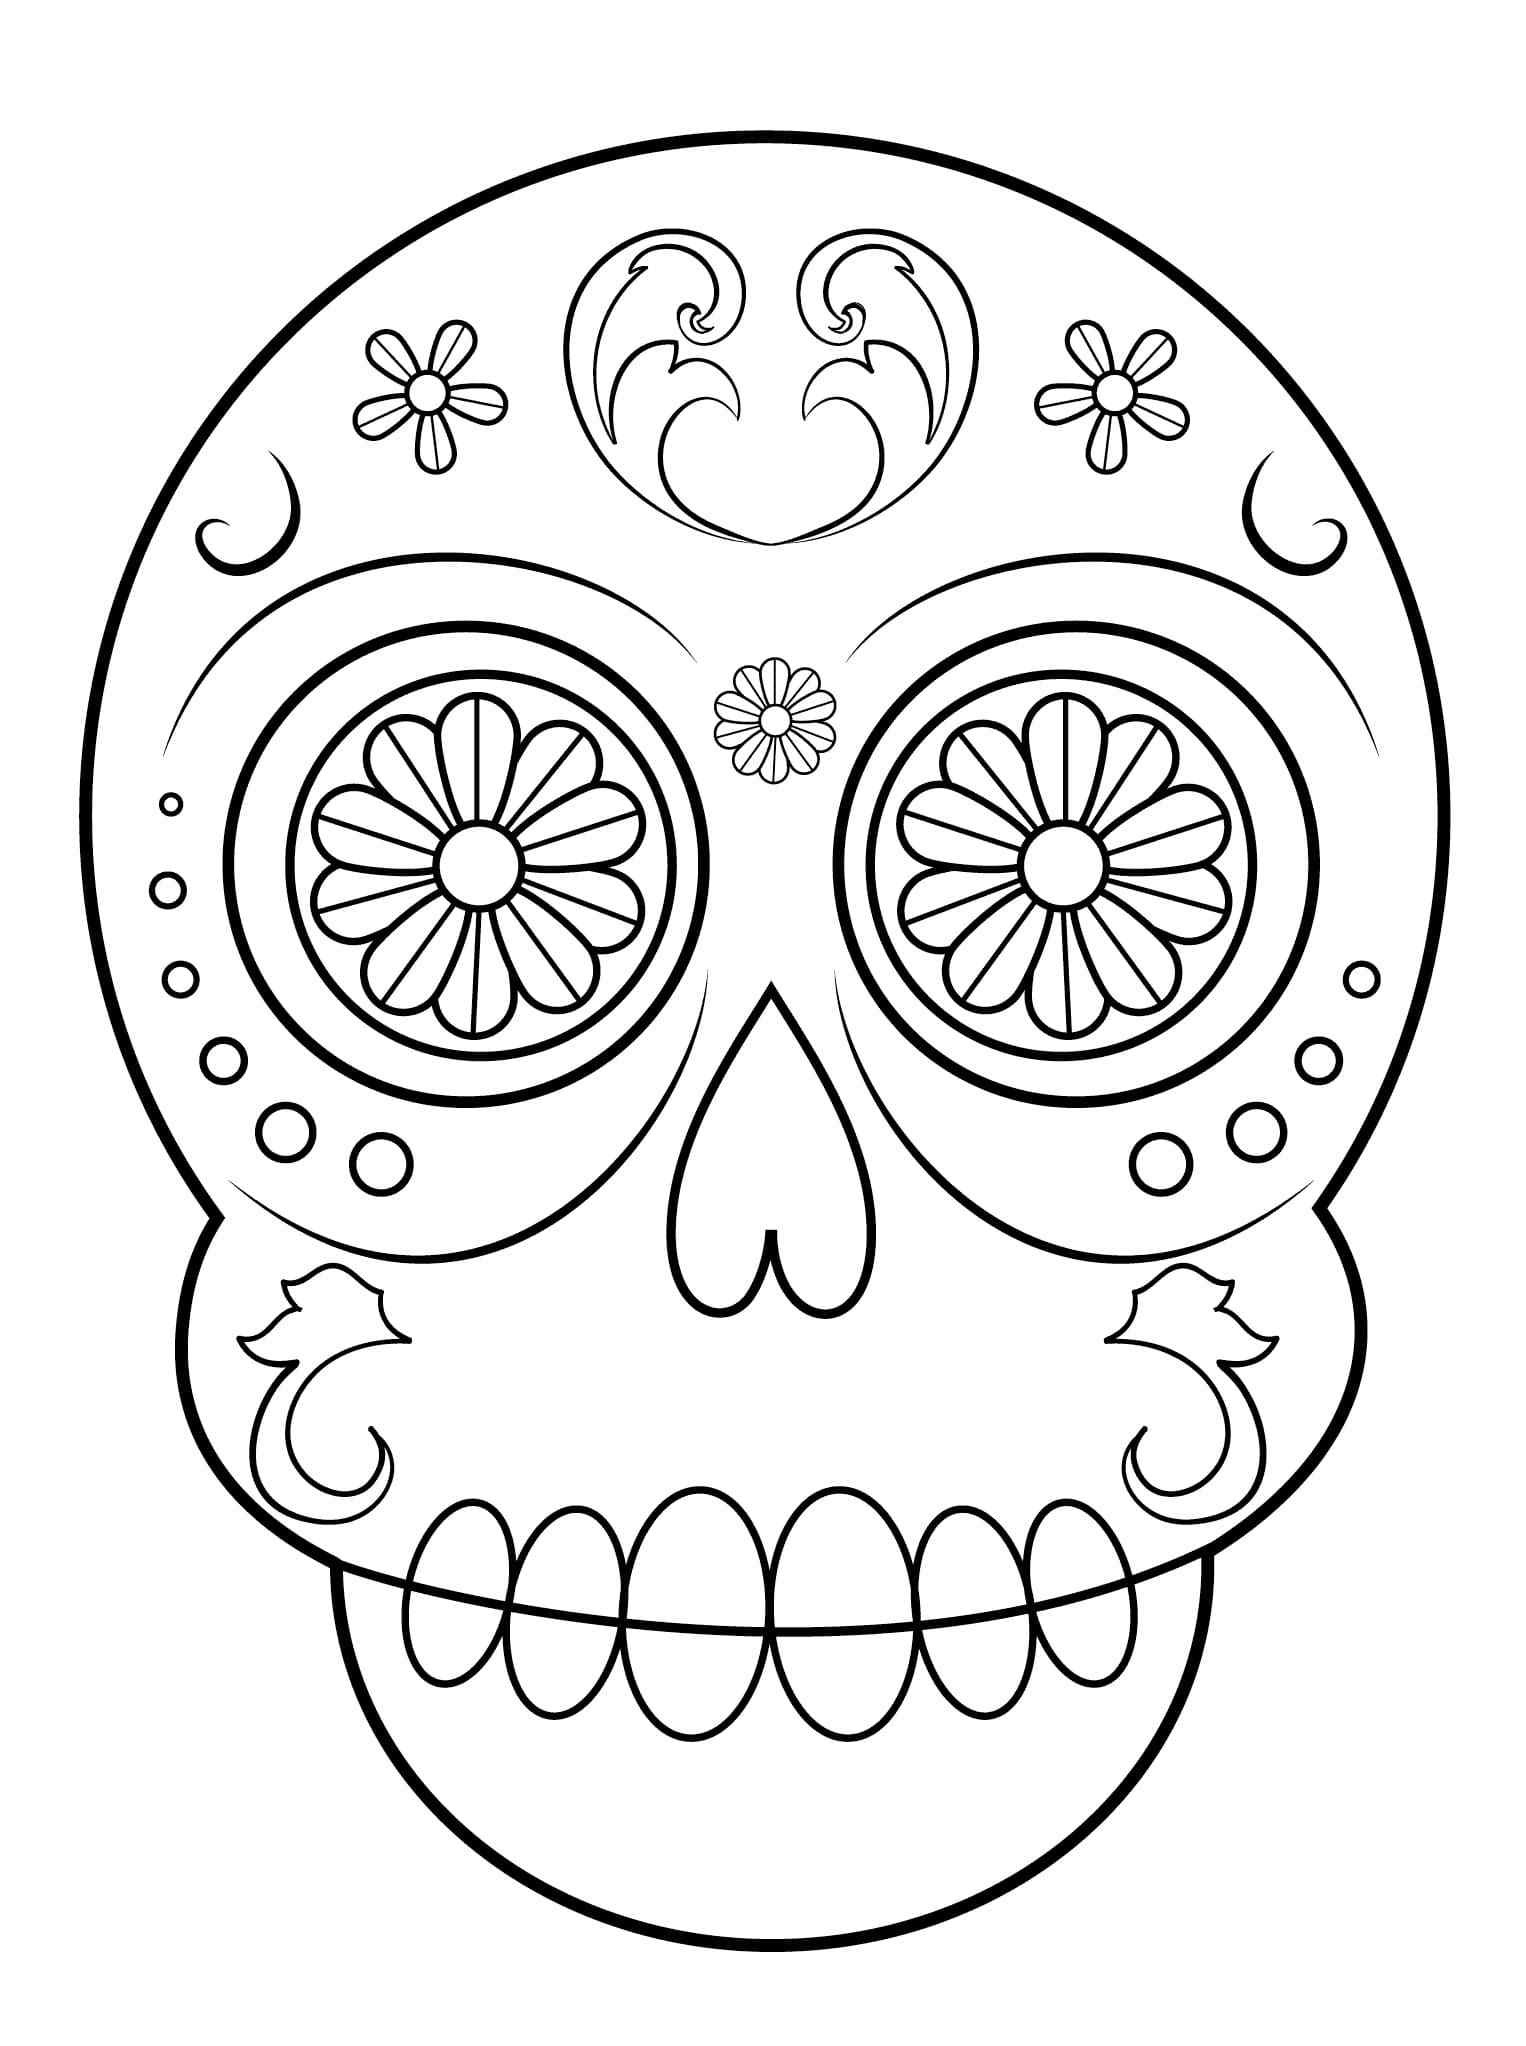 Petals In The Eyes Of She Skull Coloring Page